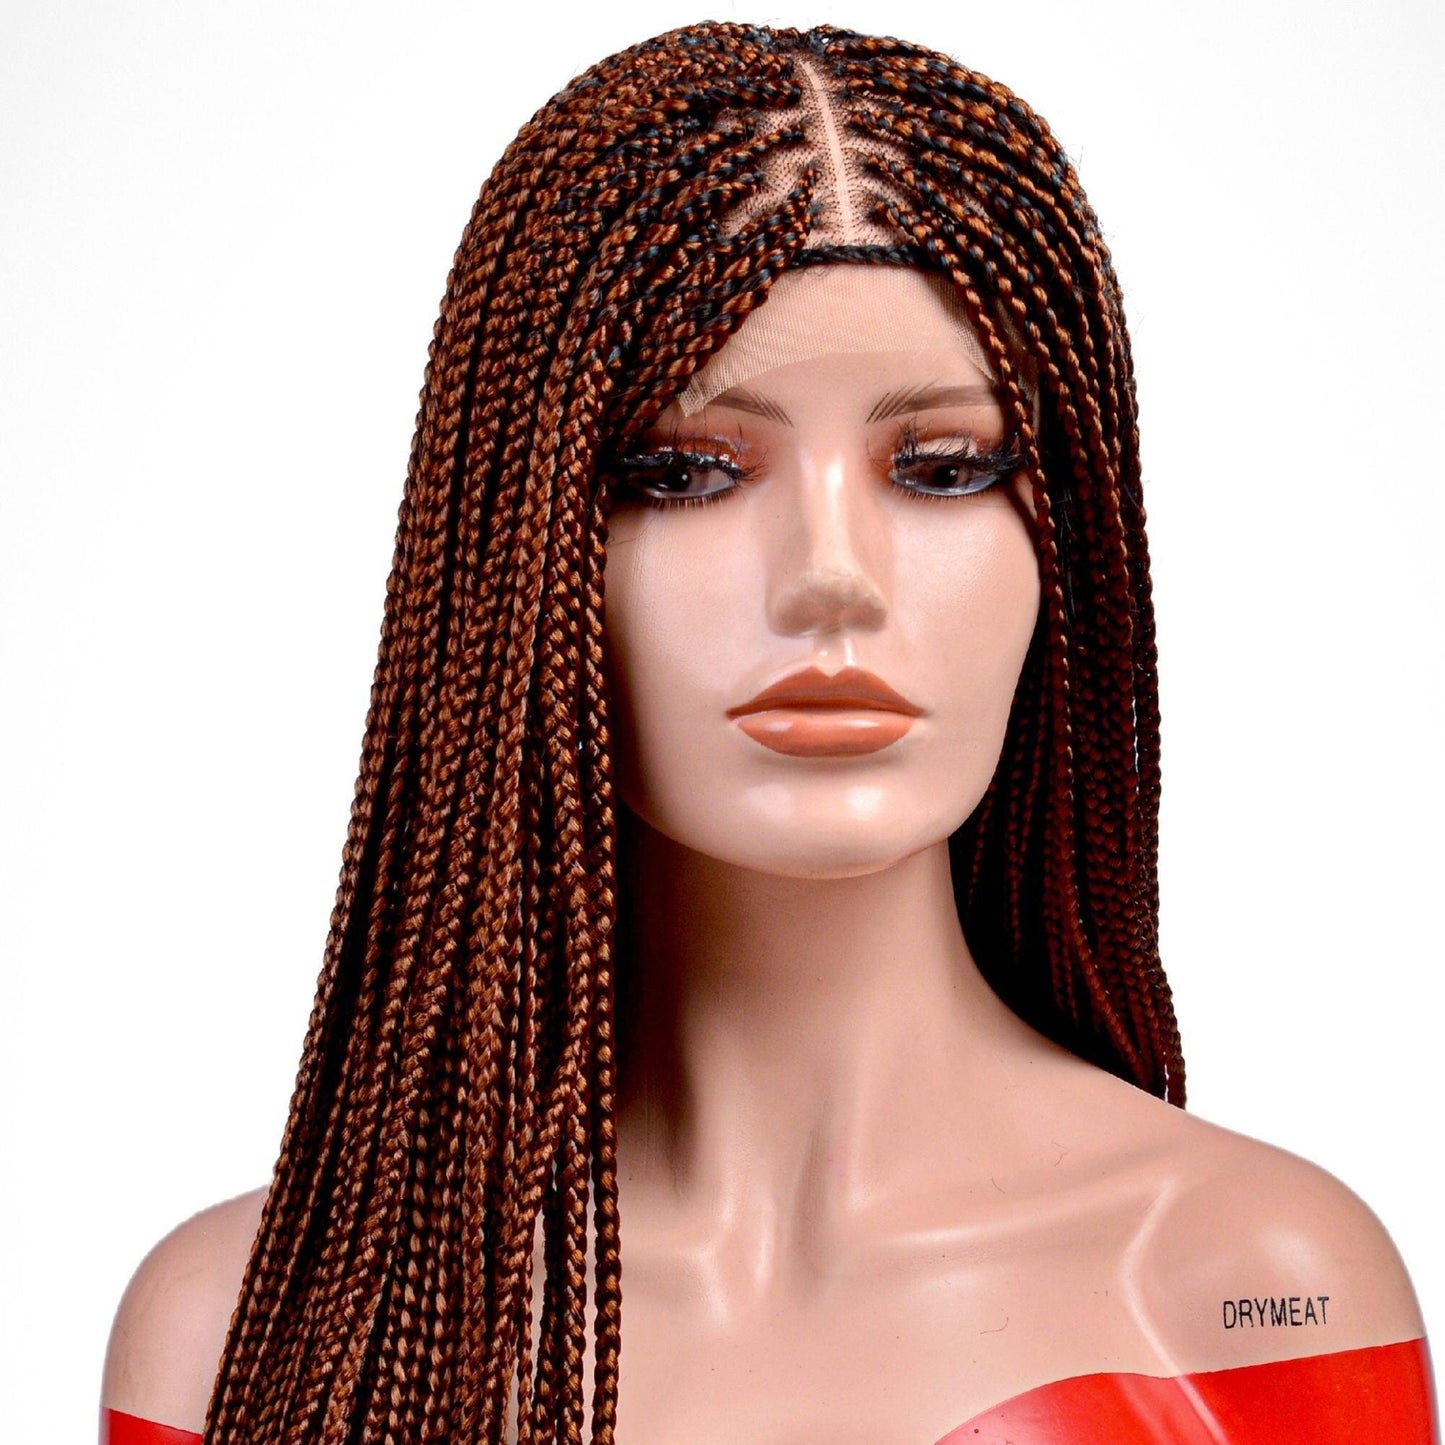 New Knotless box braid braided wigs for black women, 4 BY 4 Knotless Braided Lace Wig Auburn Color 30, 30 Inches